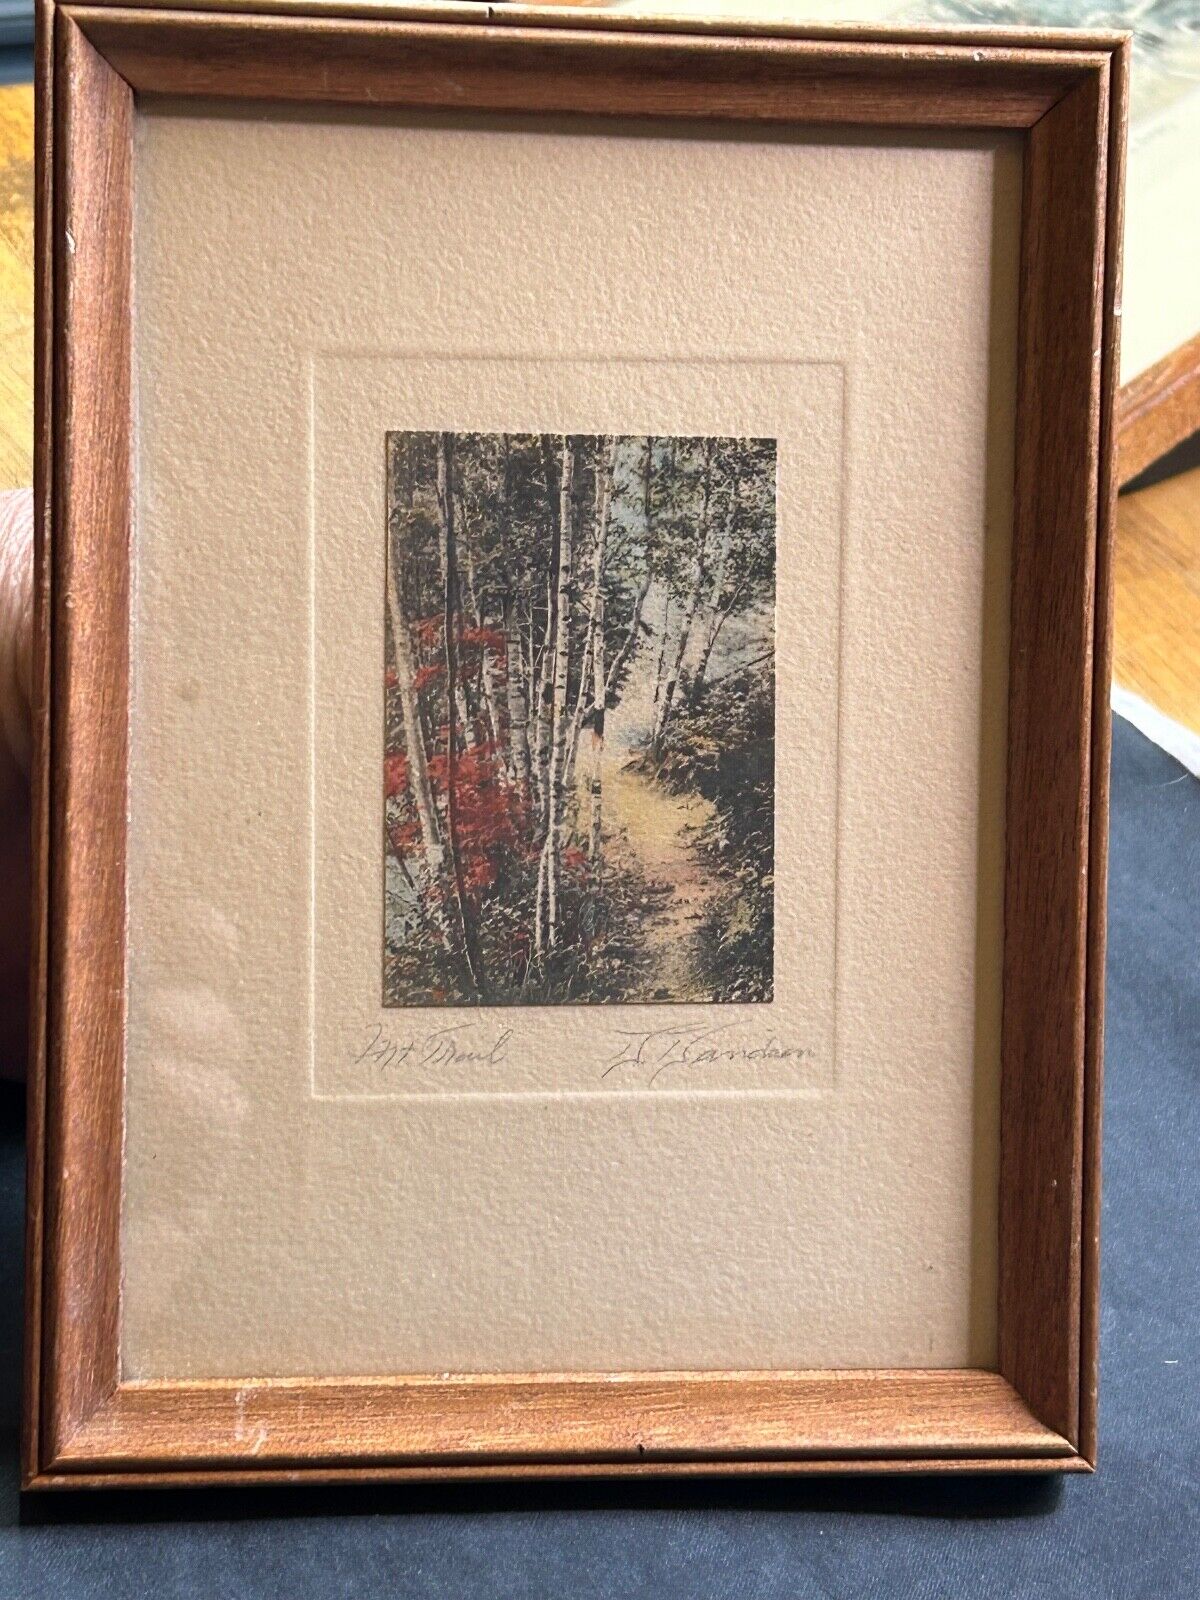 Early DAVID DAVIDSON Hand Colored Photo, MT. TRAIL, Framed, Matted & Under Glass